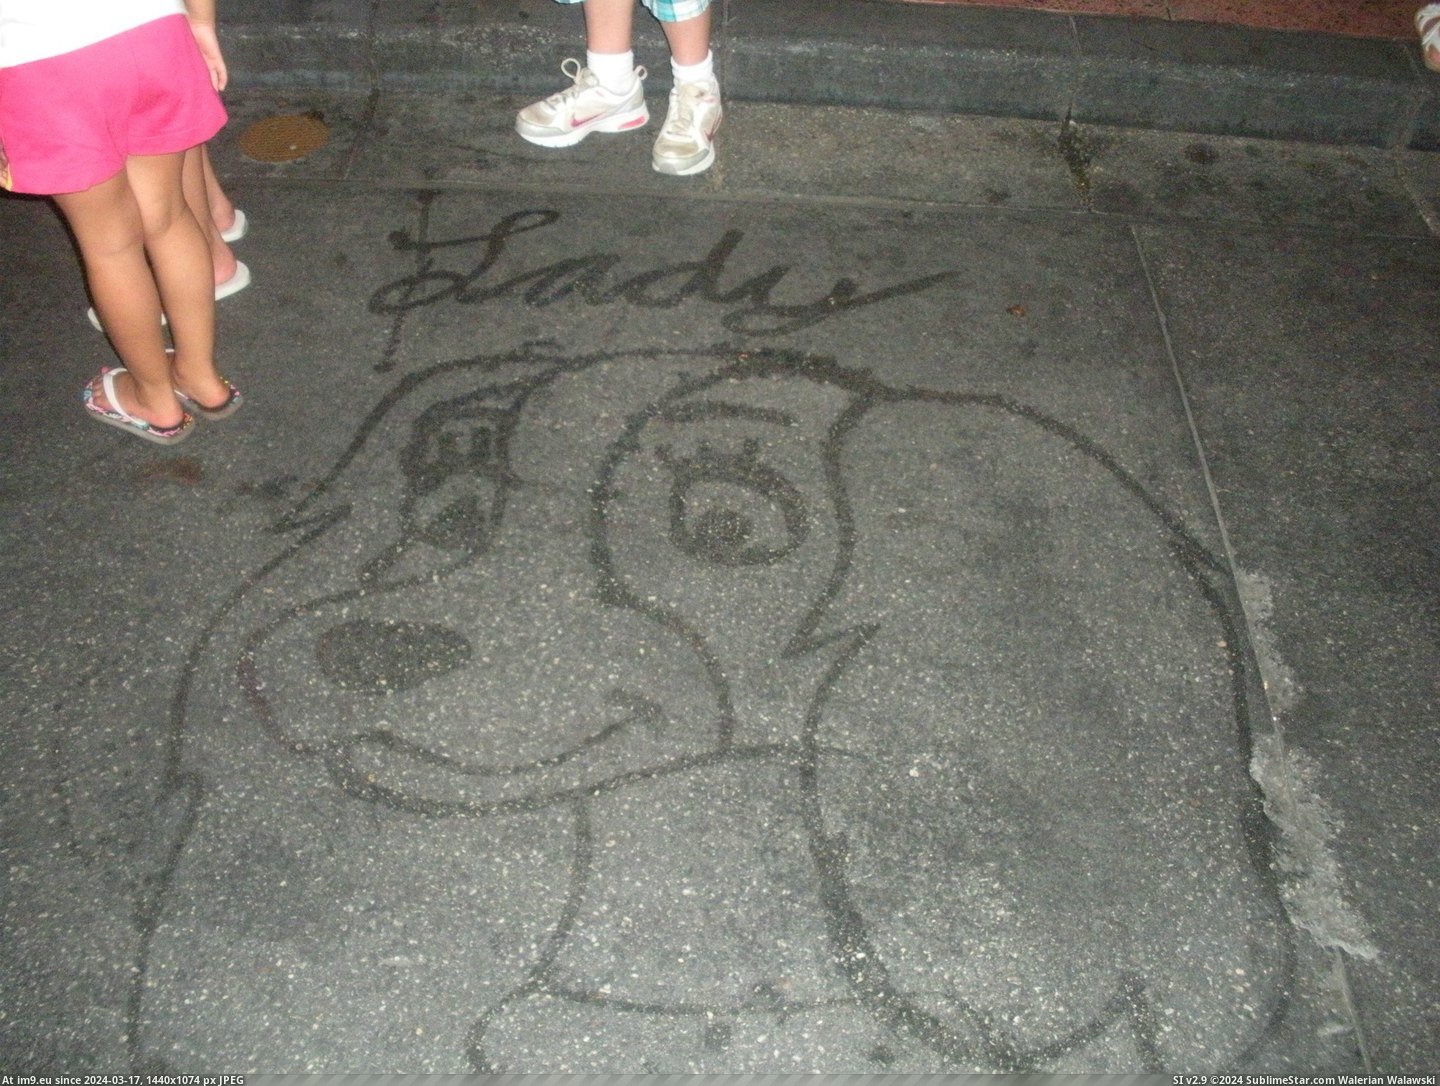 #World #Water #Disney #Guests #Janitor #Broom #Entertain #Characters #Drew #Sidewalk [Pics] As a janitor at Disney World, I drew characters with water and a broom on the sidewalk to entertain guests. 6 Pic. (Bild von album My r/PICS favs))